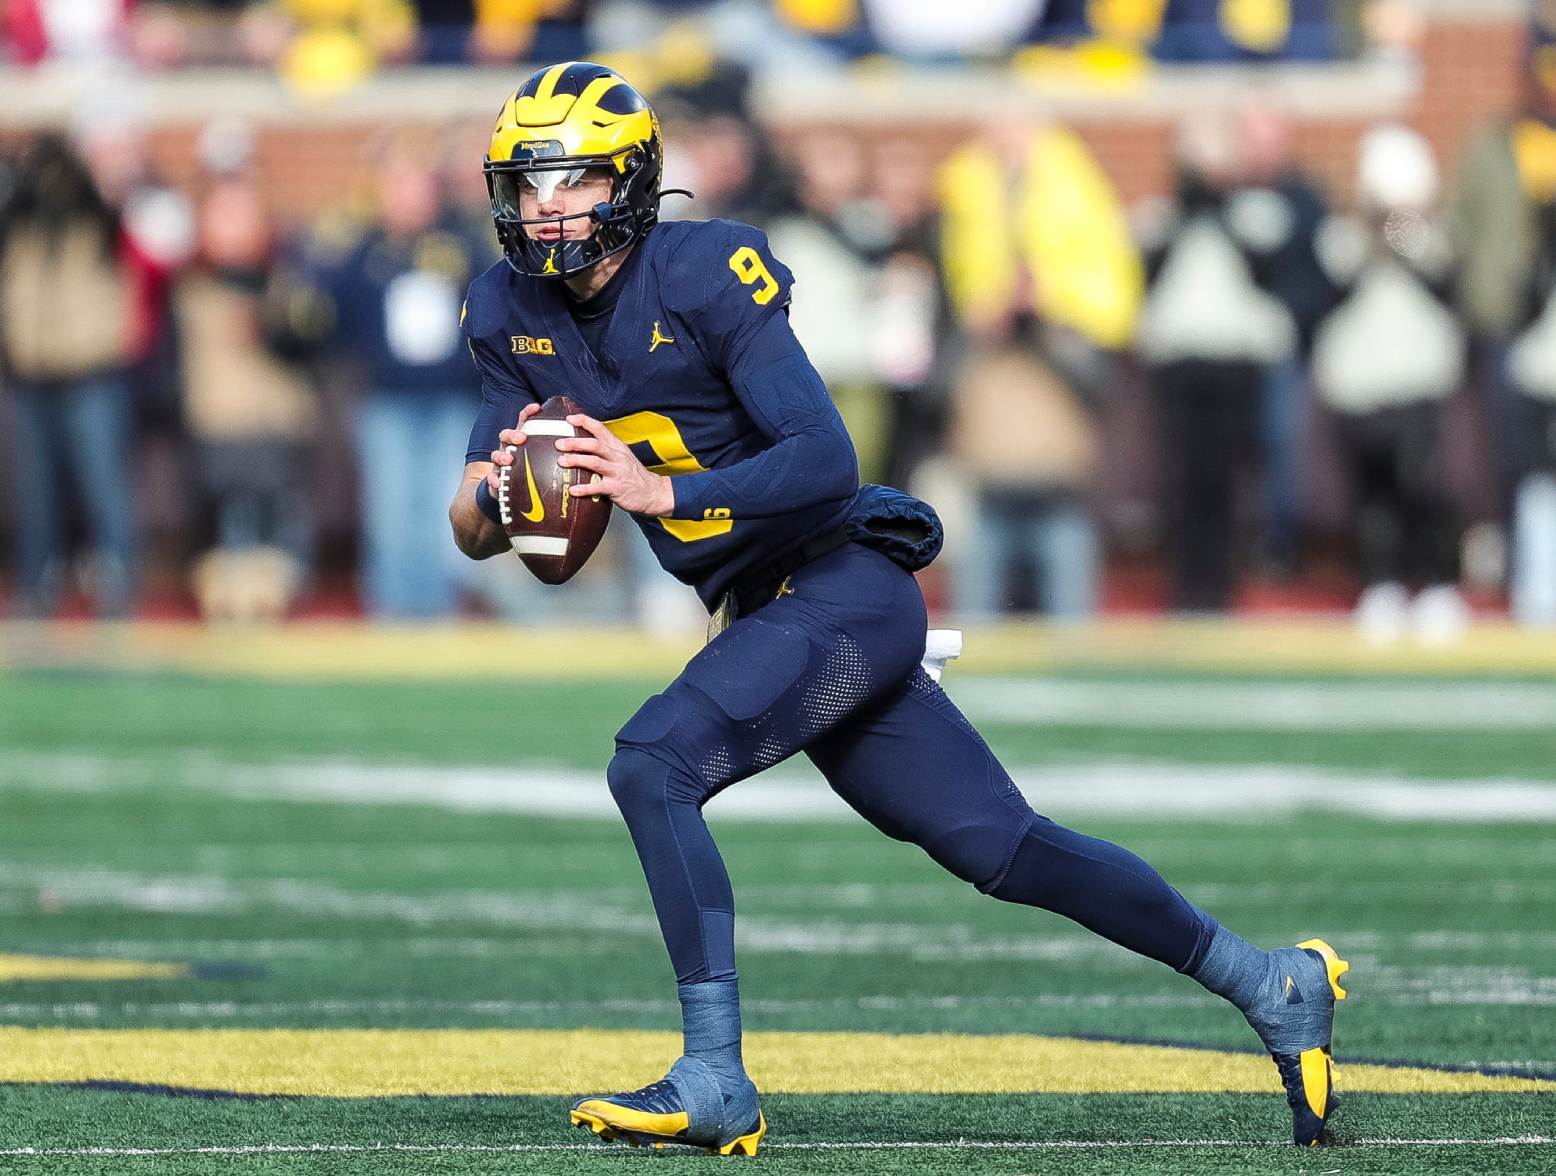 Michigan quarterback J.J. McCarthy looks to pass against Ohio State during the first half at Michigan Stadium in Ann Arbor on Saturday, Nov. 25, 2023. (Junfu Han/USA Today Network)